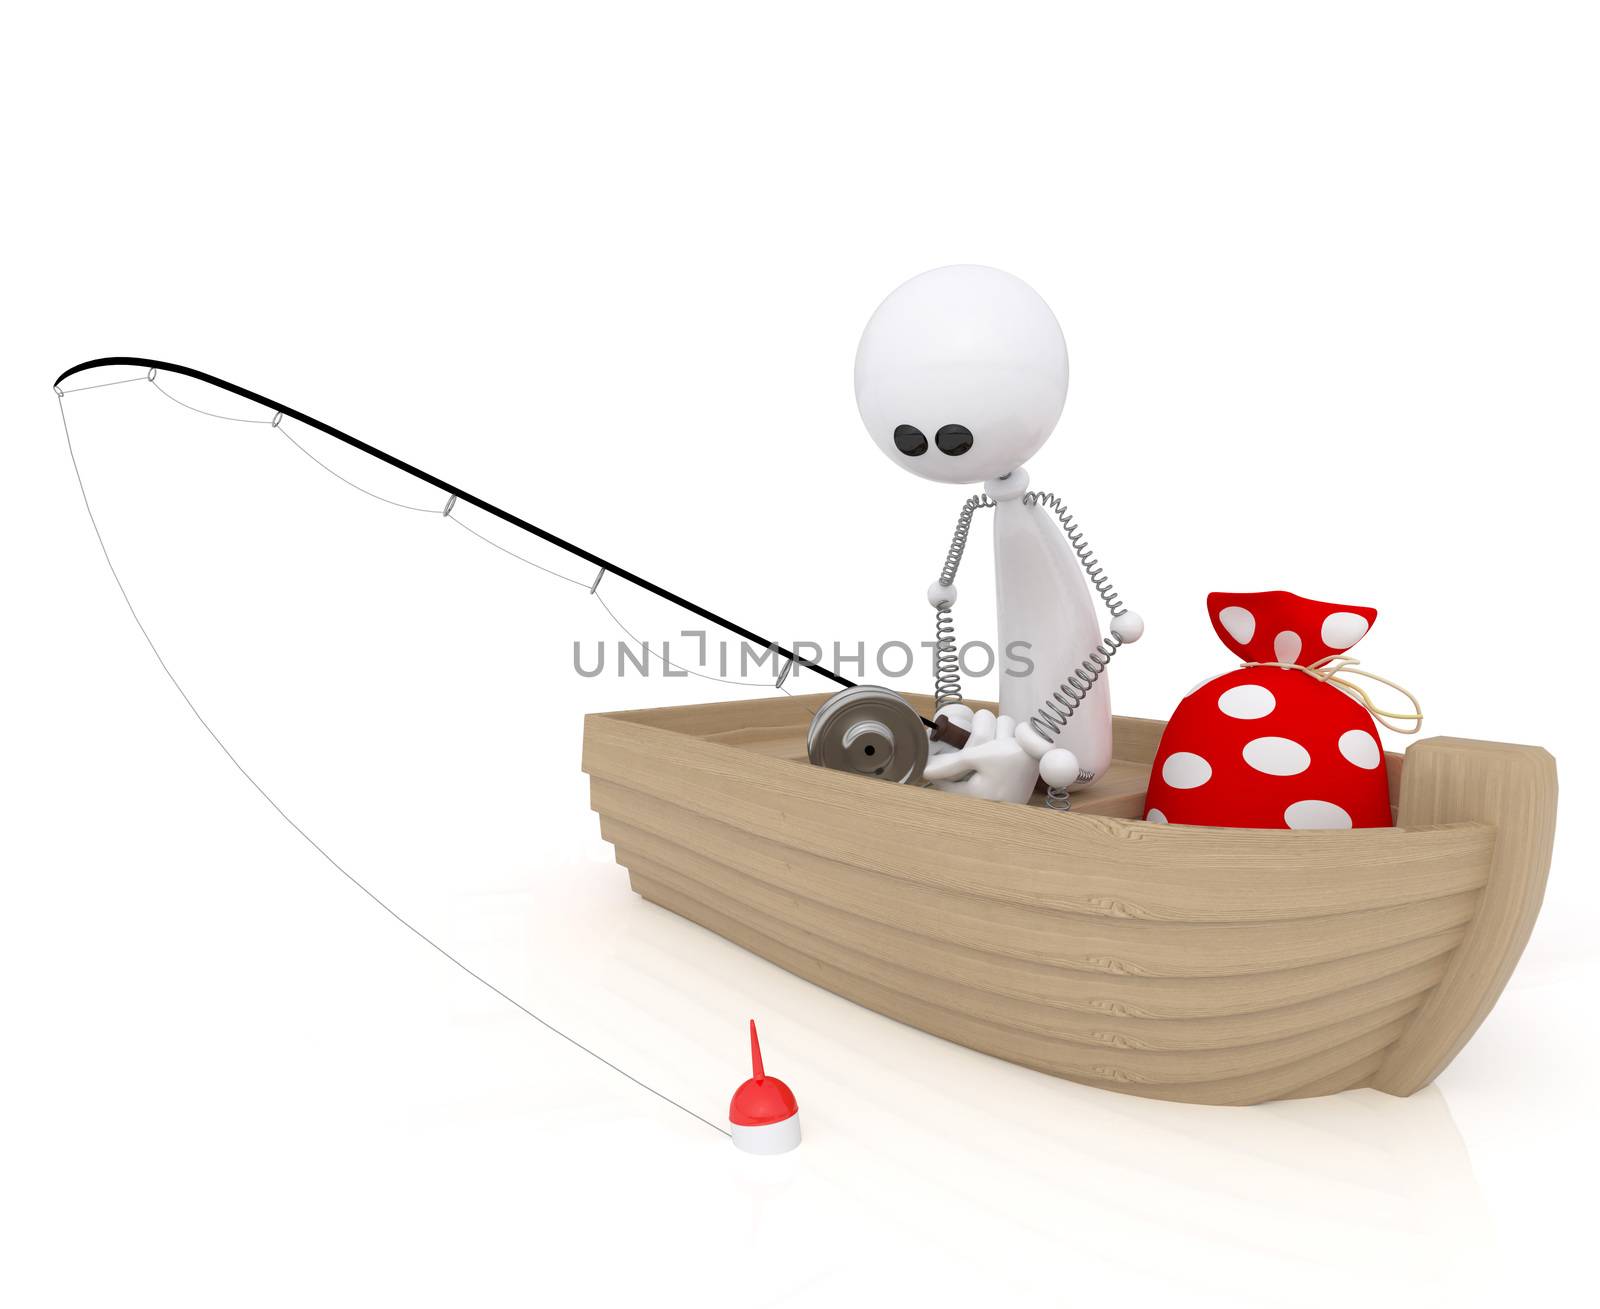 The character in the boat on fishing with a rod.